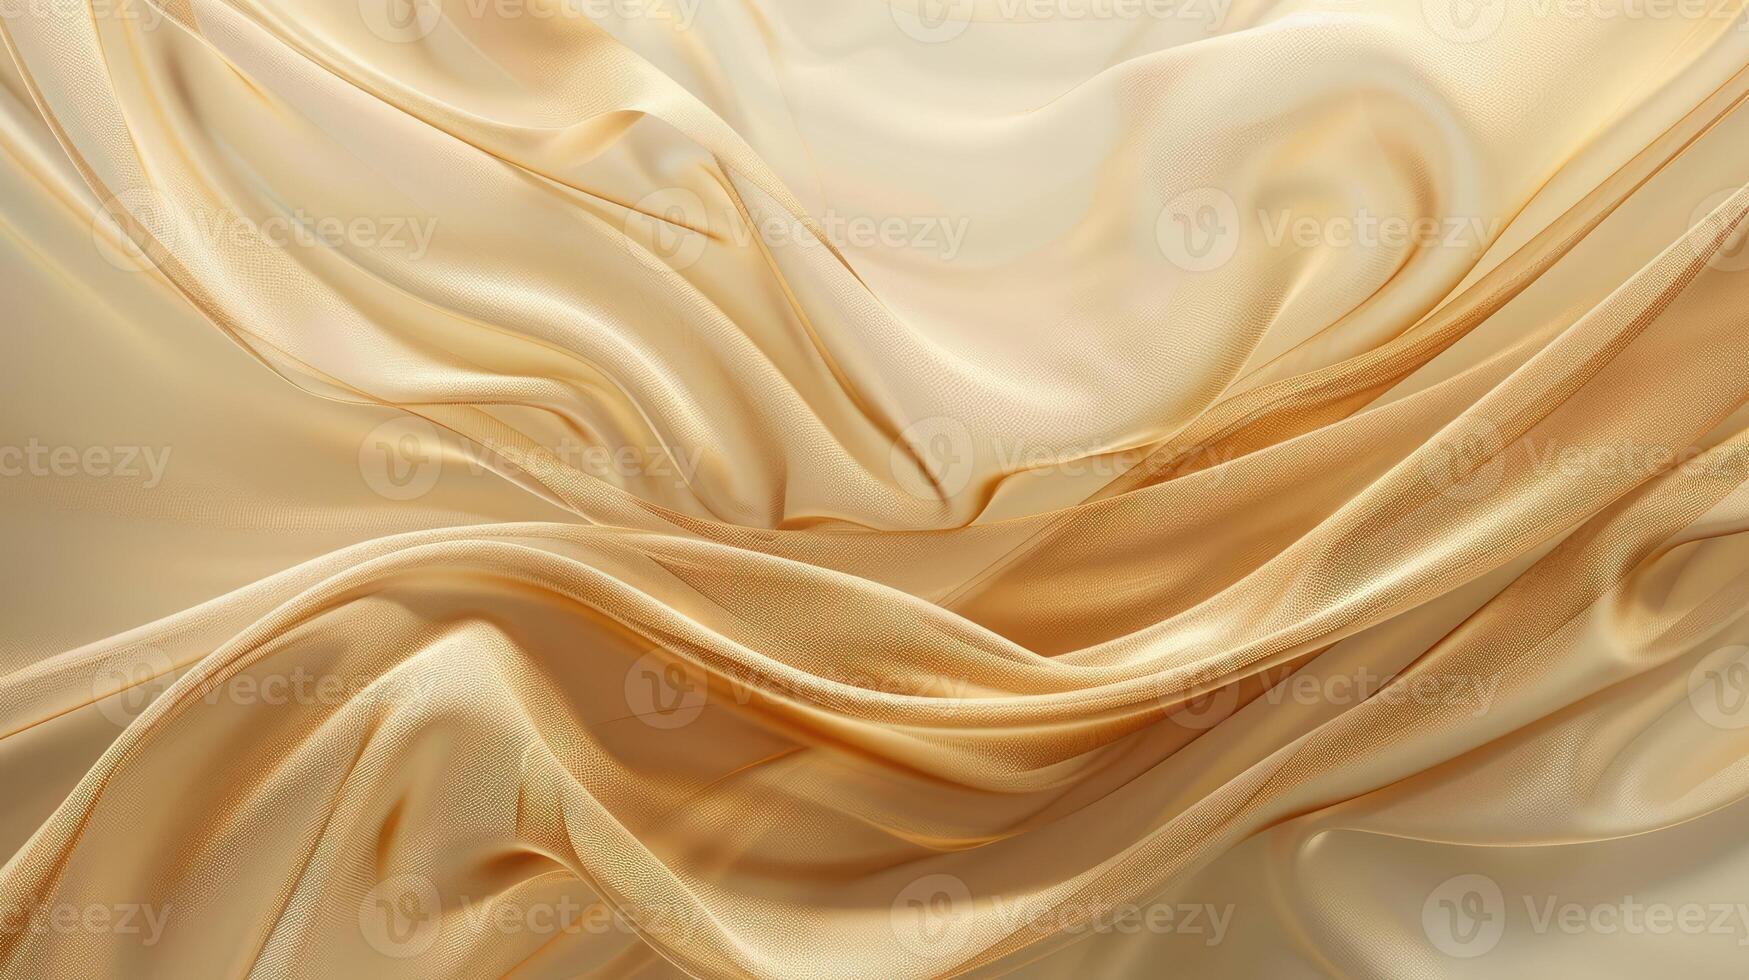 Gold Cloth Stock Photos, Images and Backgrounds for Free Download